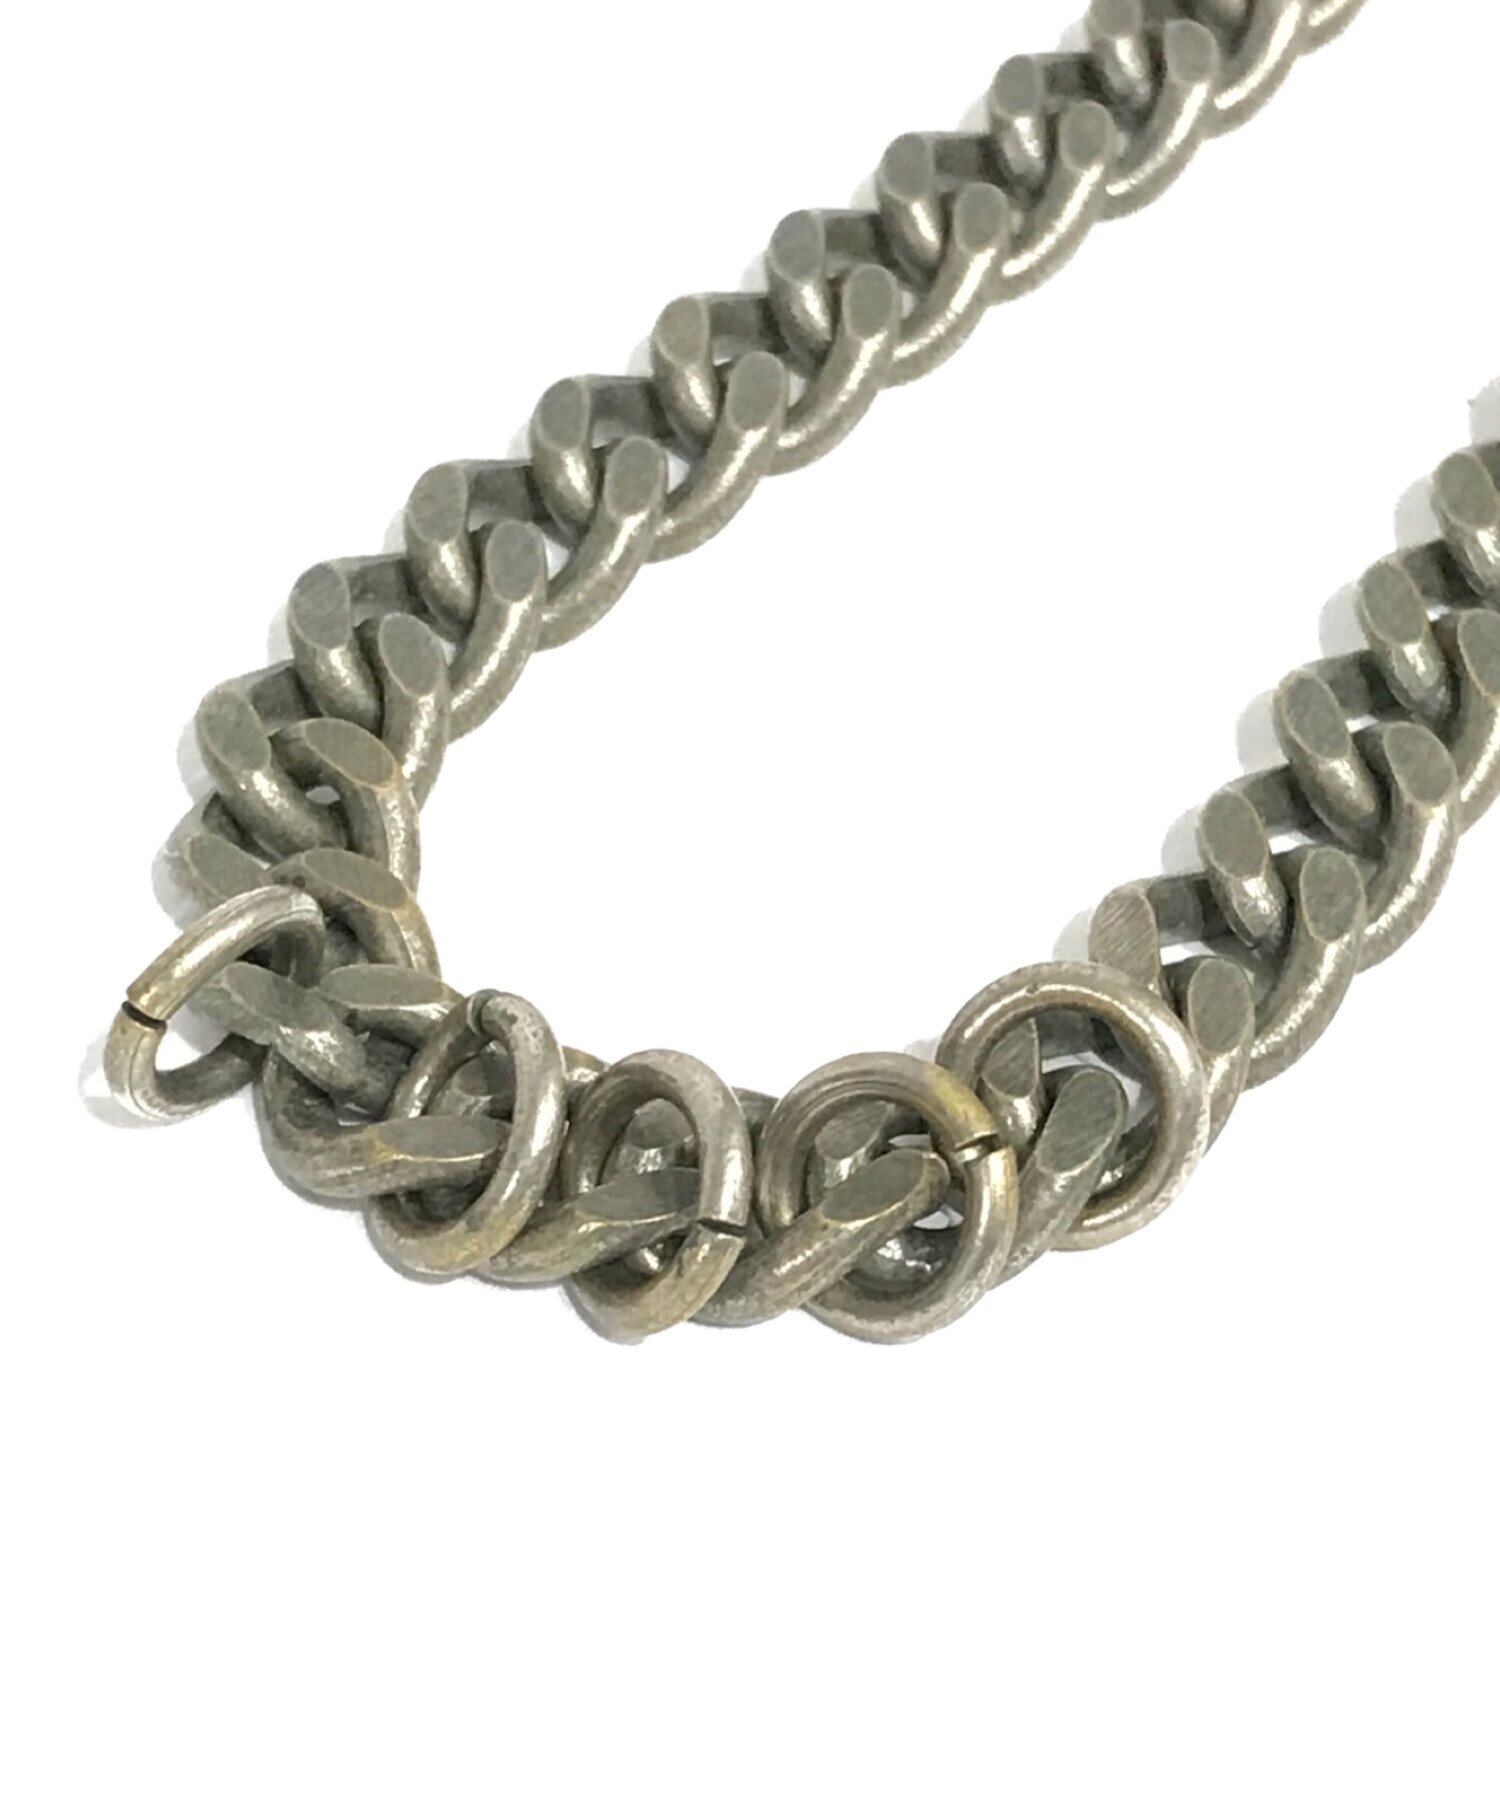 s'yte (サイト) 6-WAY CURVED CHAIN BRACELET NECKLACE ネックレス シルバーカラー